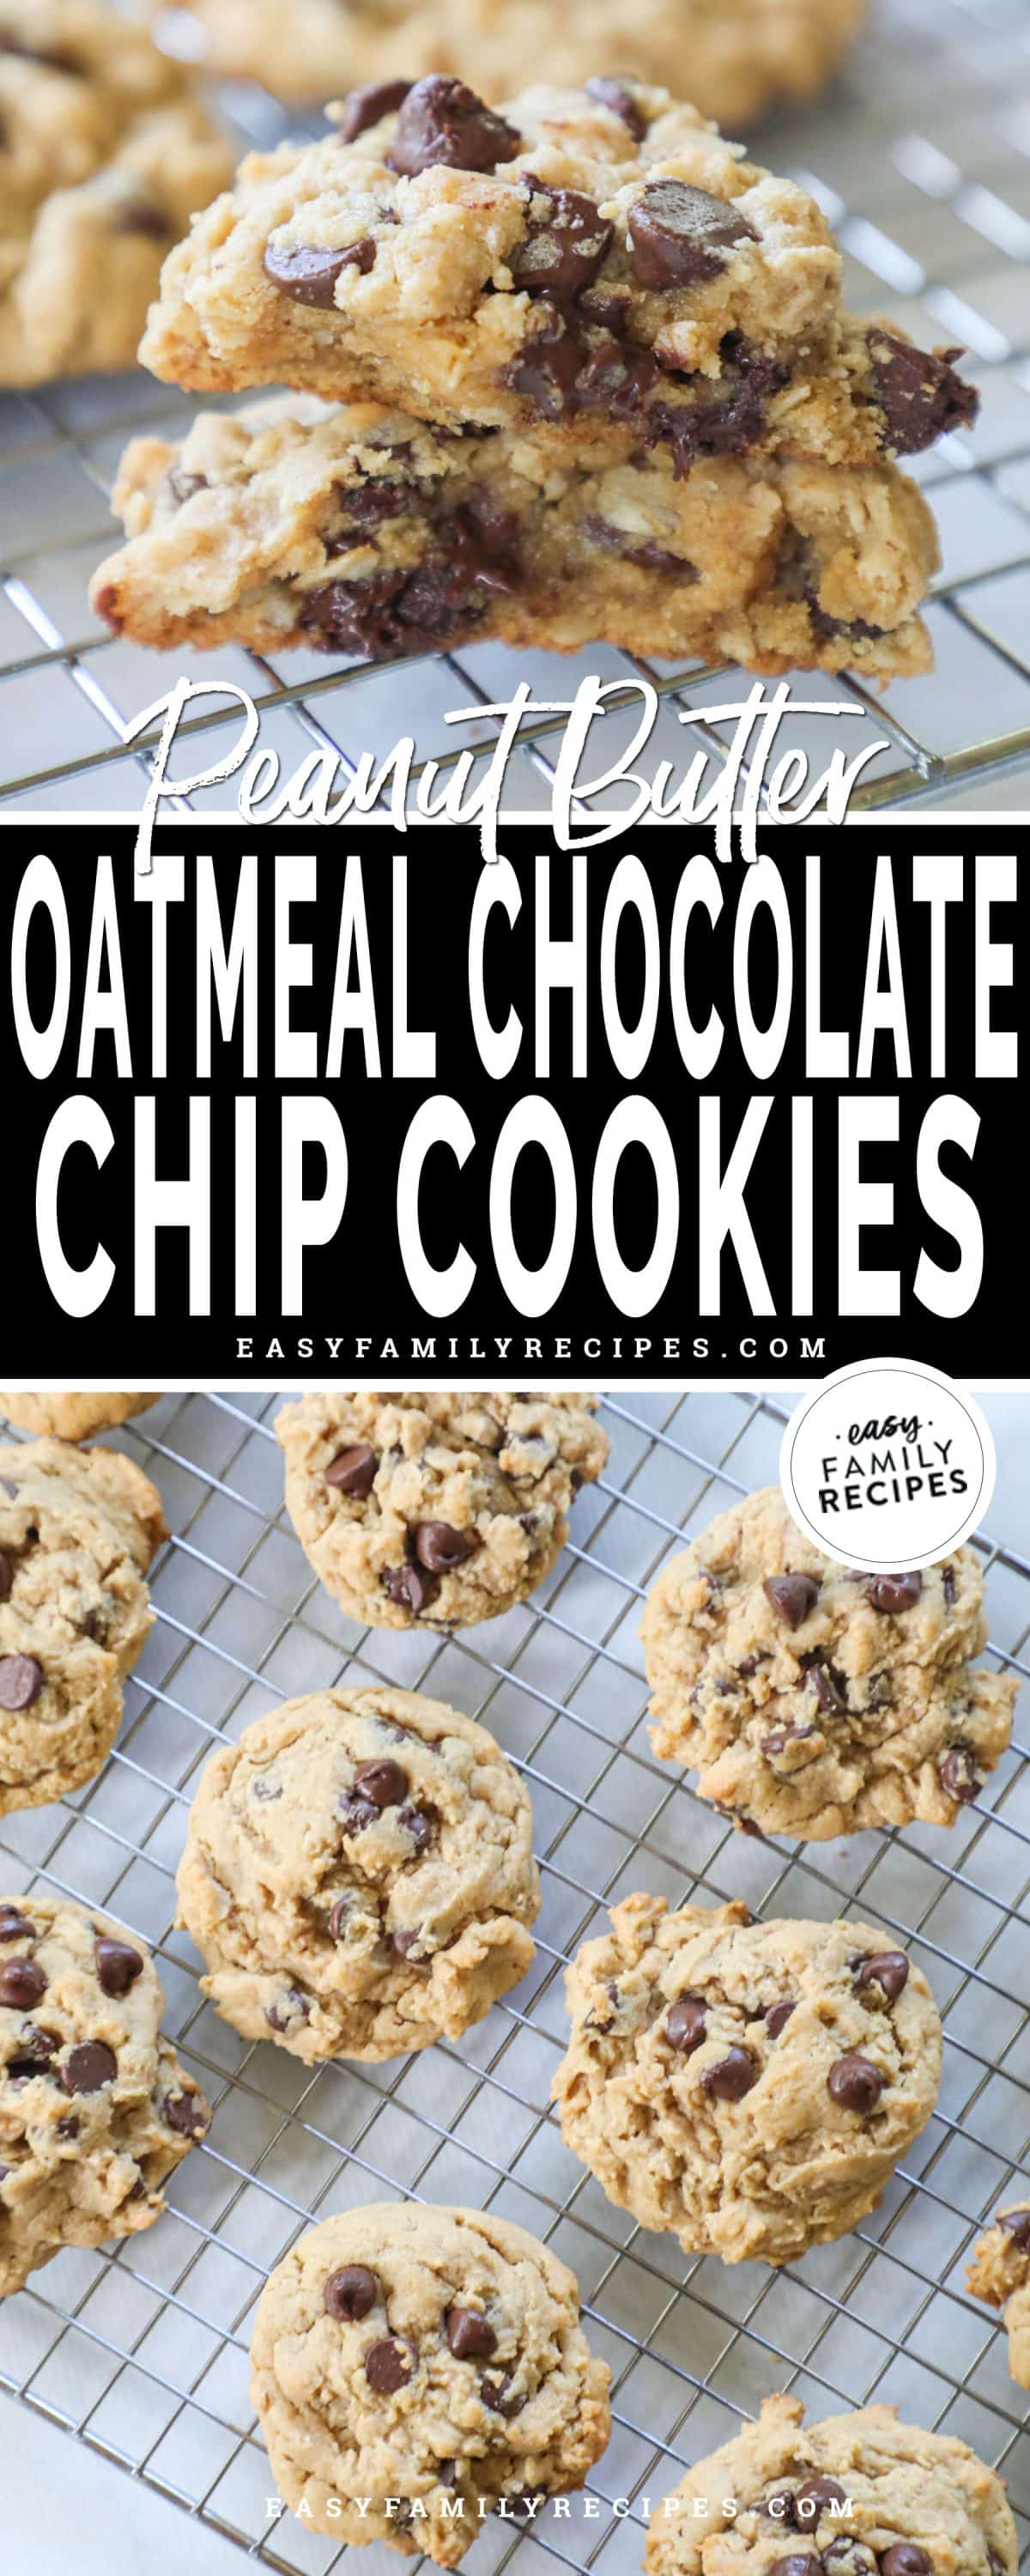 Peanut butter oatmeal cookies with chocolate chips sitting on a wire rack.